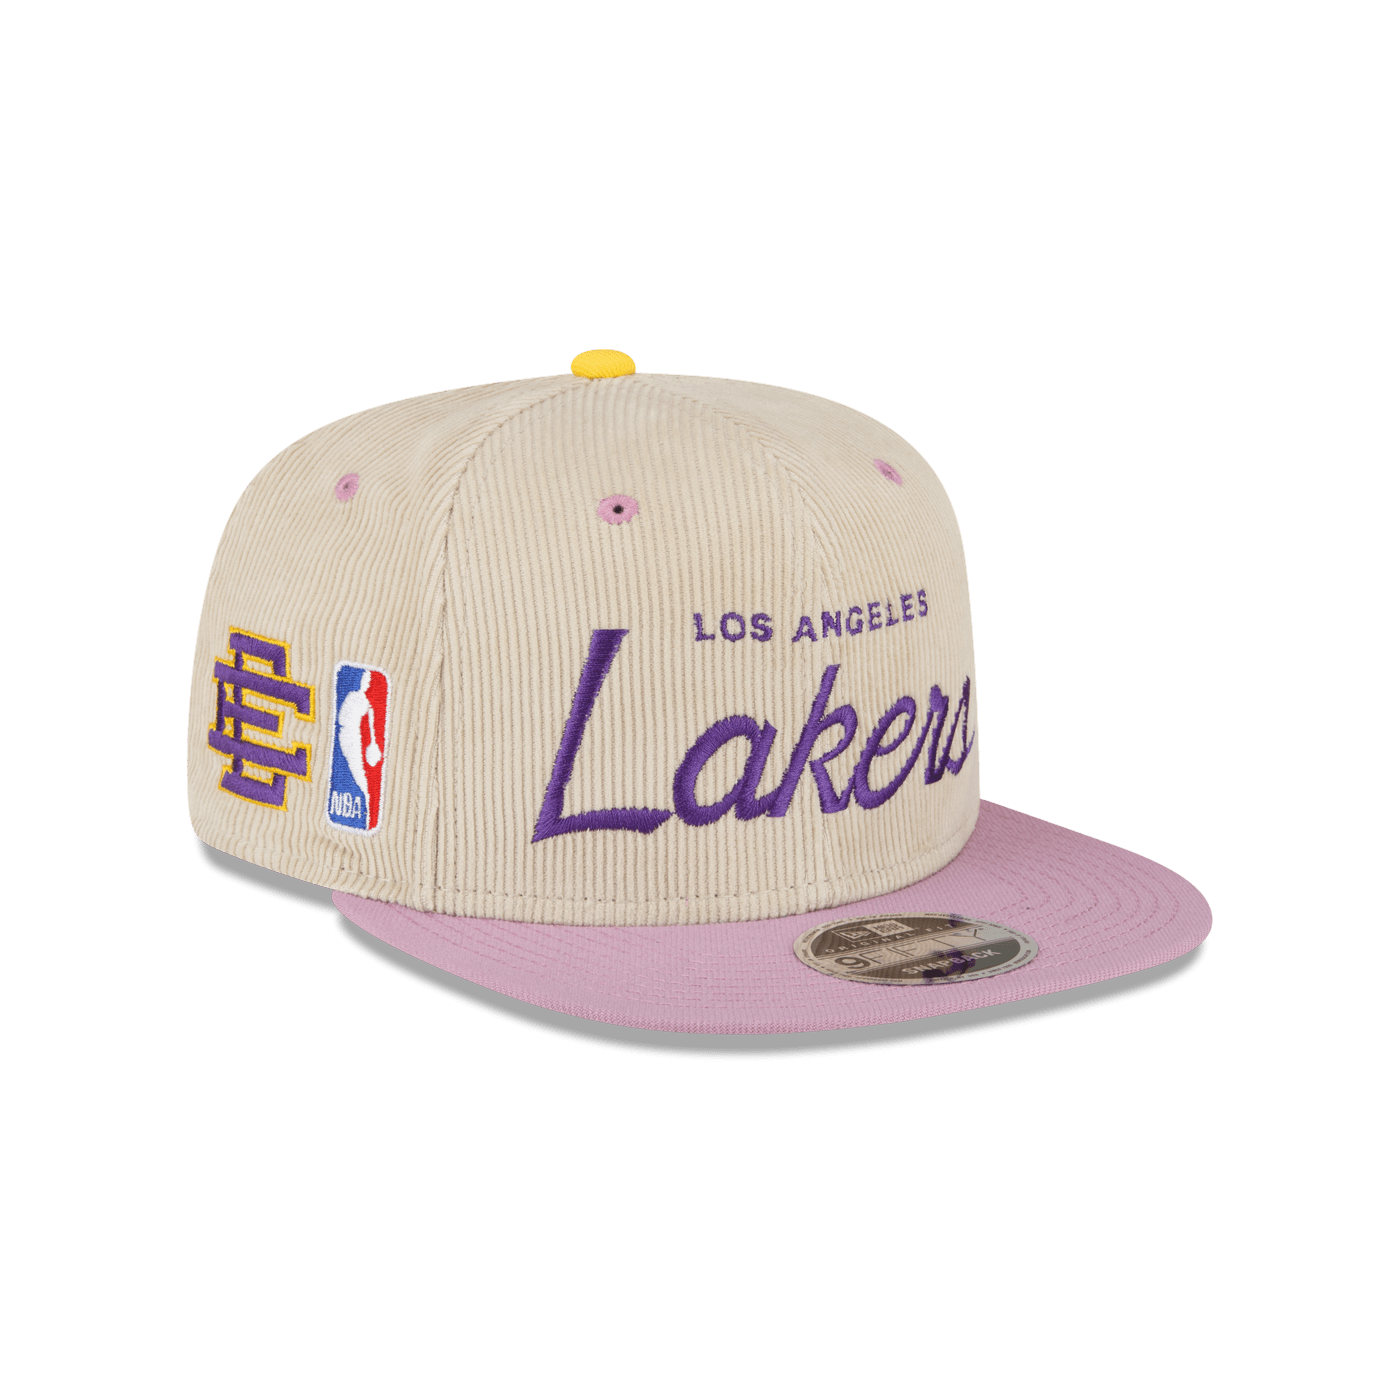 Eric Emanuel X Los Angeles Lakers 9FIFTY Snapback Hat